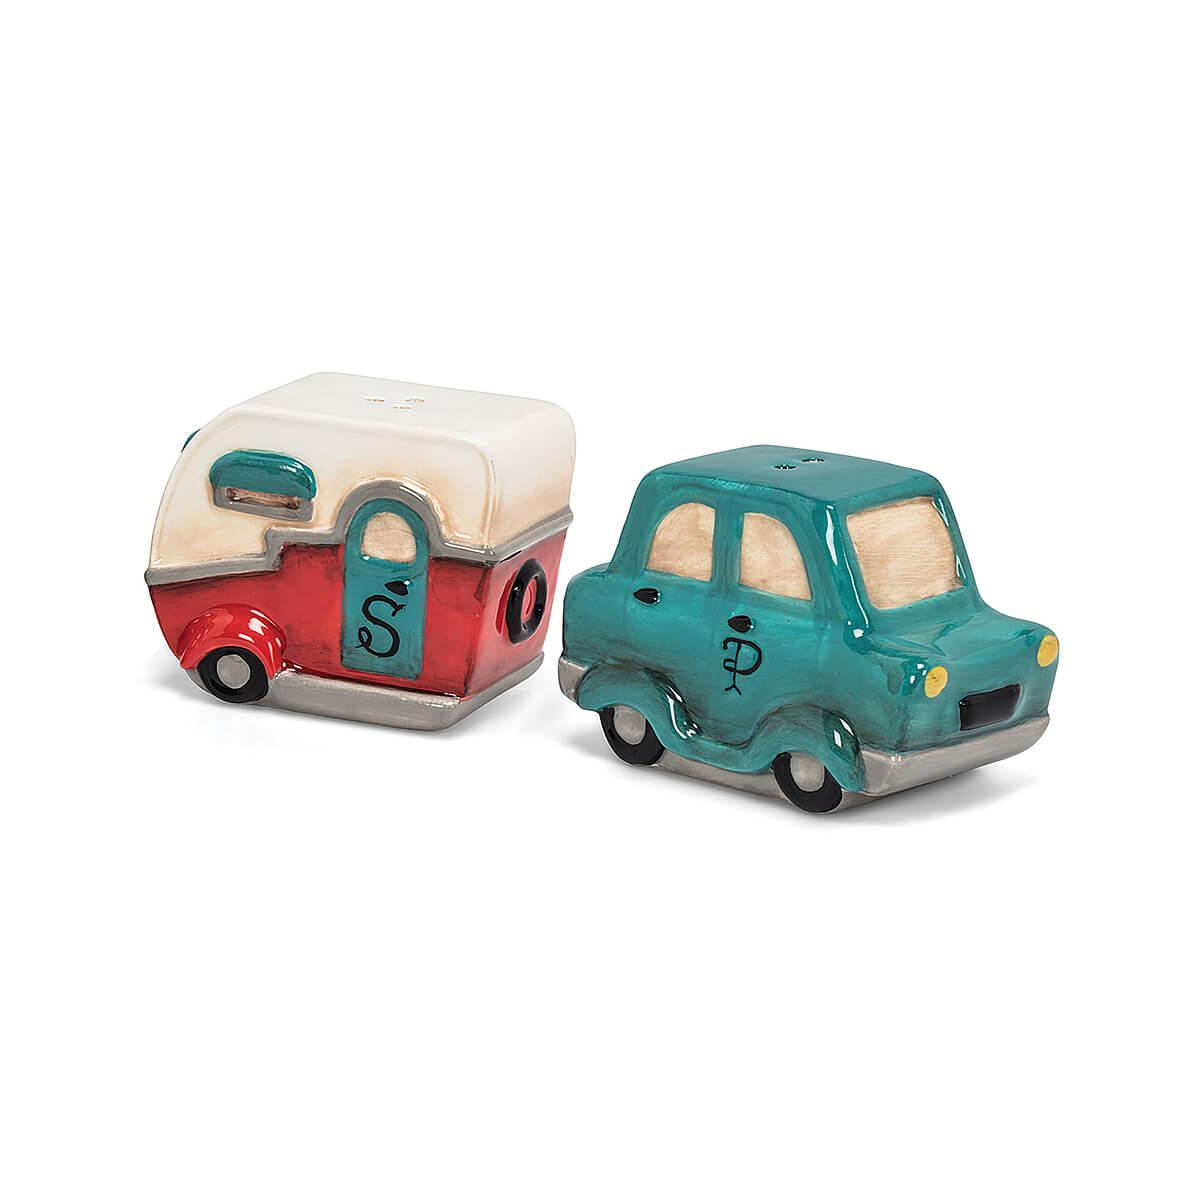  Car And Camper Salt And Pepper Shakers